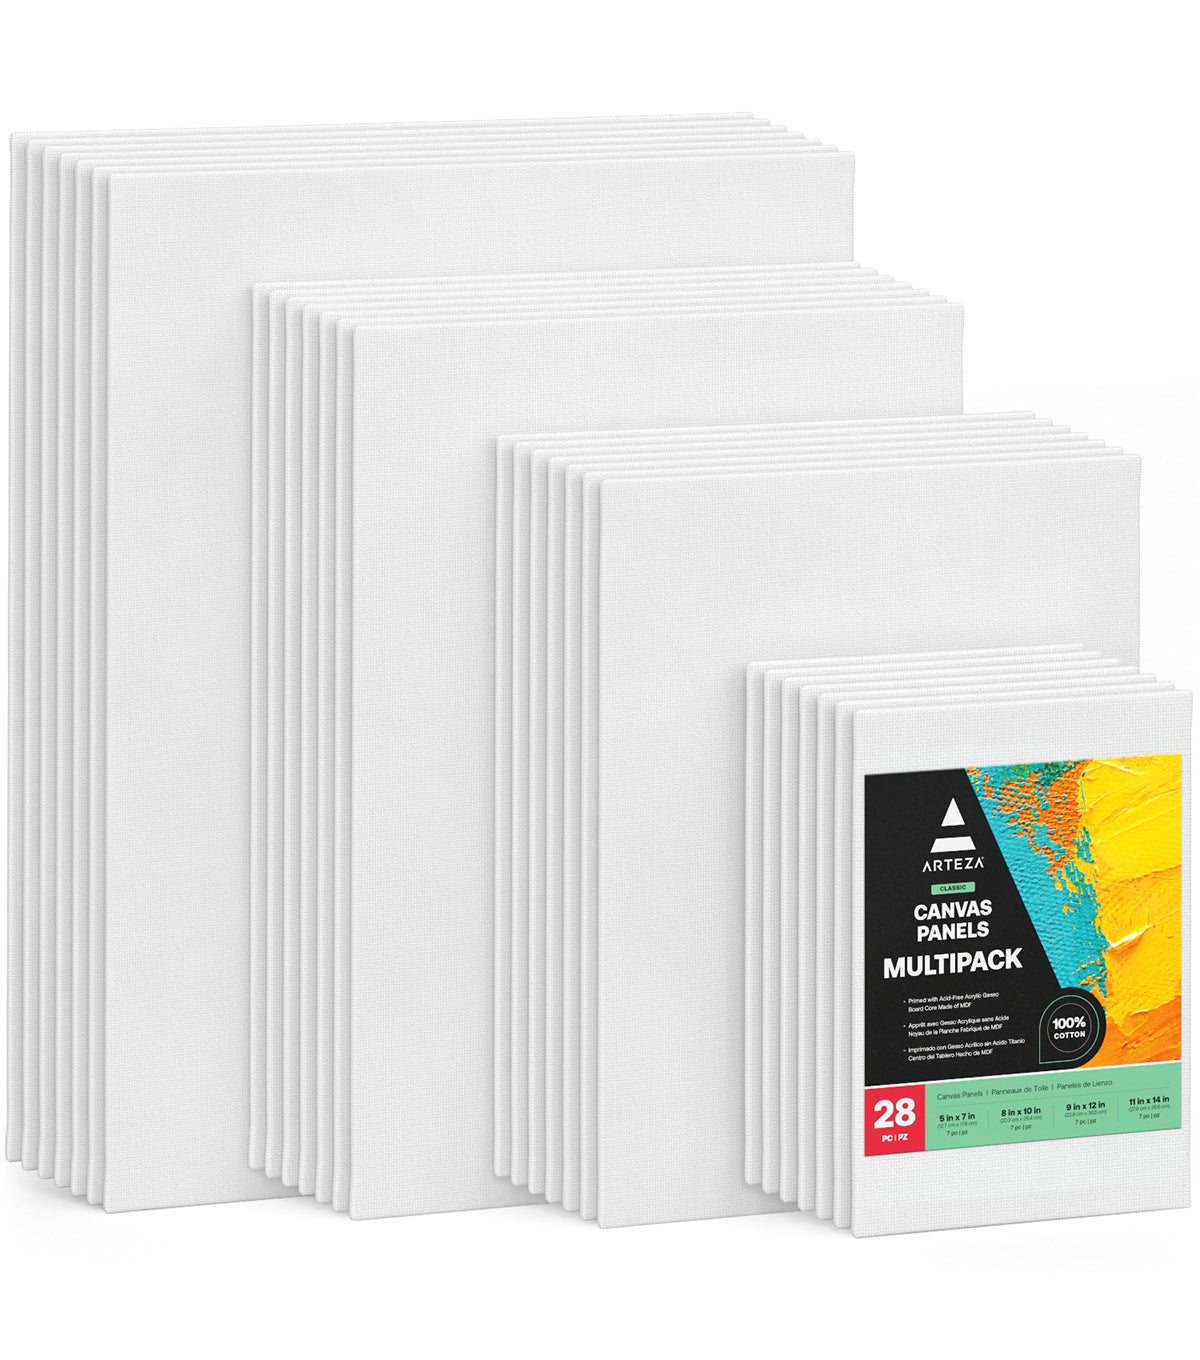 Mixed Shape Canvases, Multipack - Set of 10 –